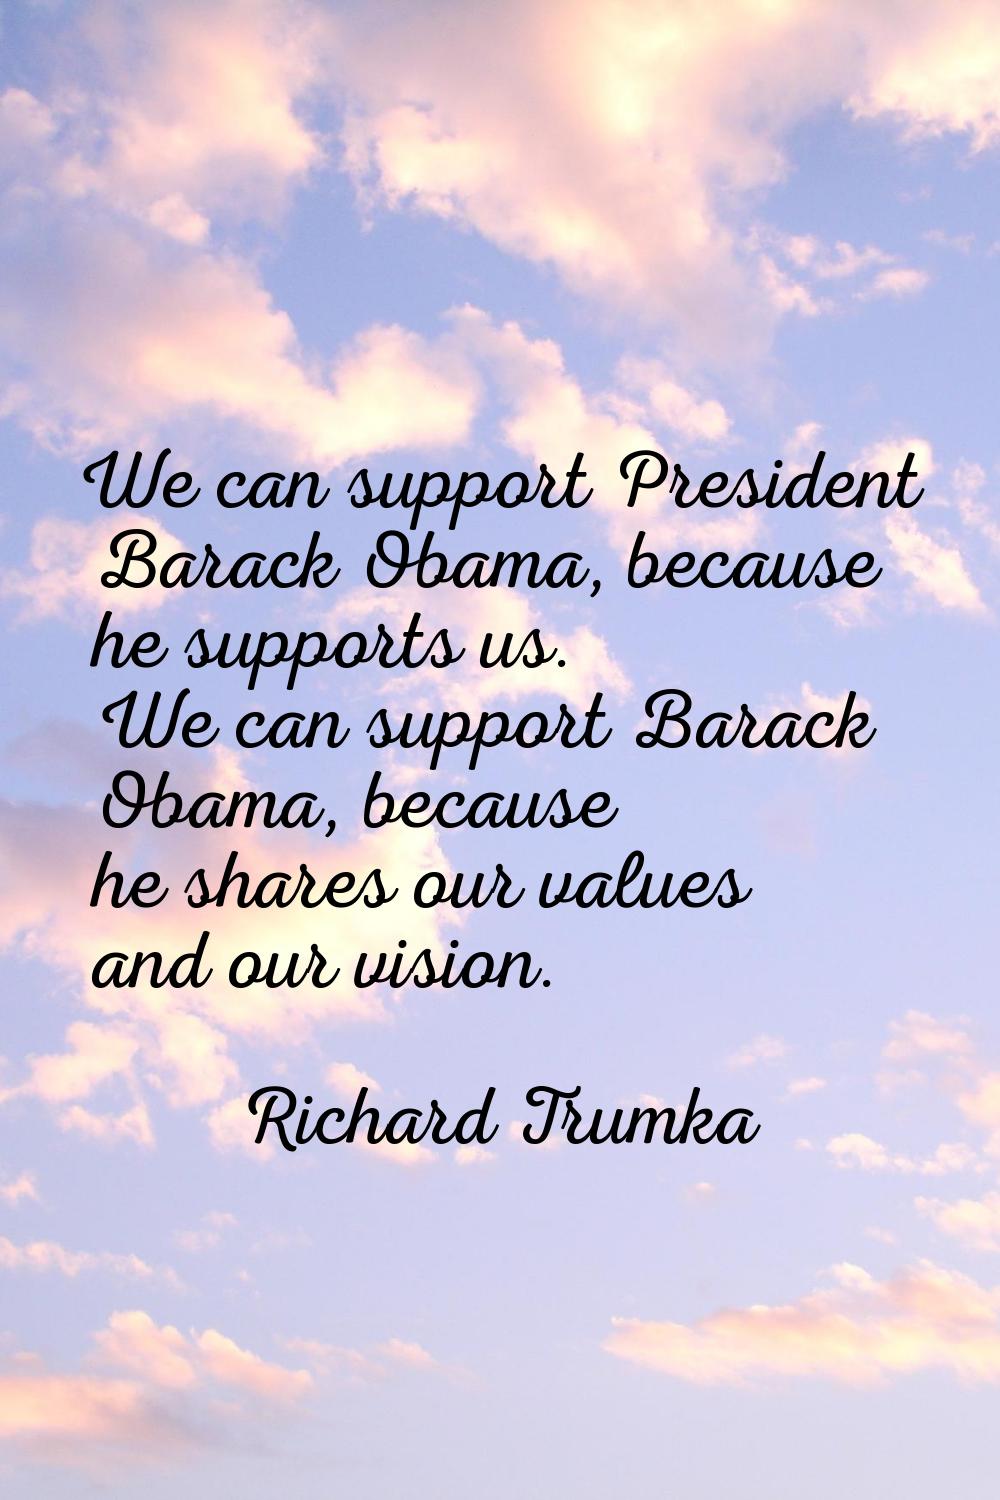 We can support President Barack Obama, because he supports us. We can support Barack Obama, because